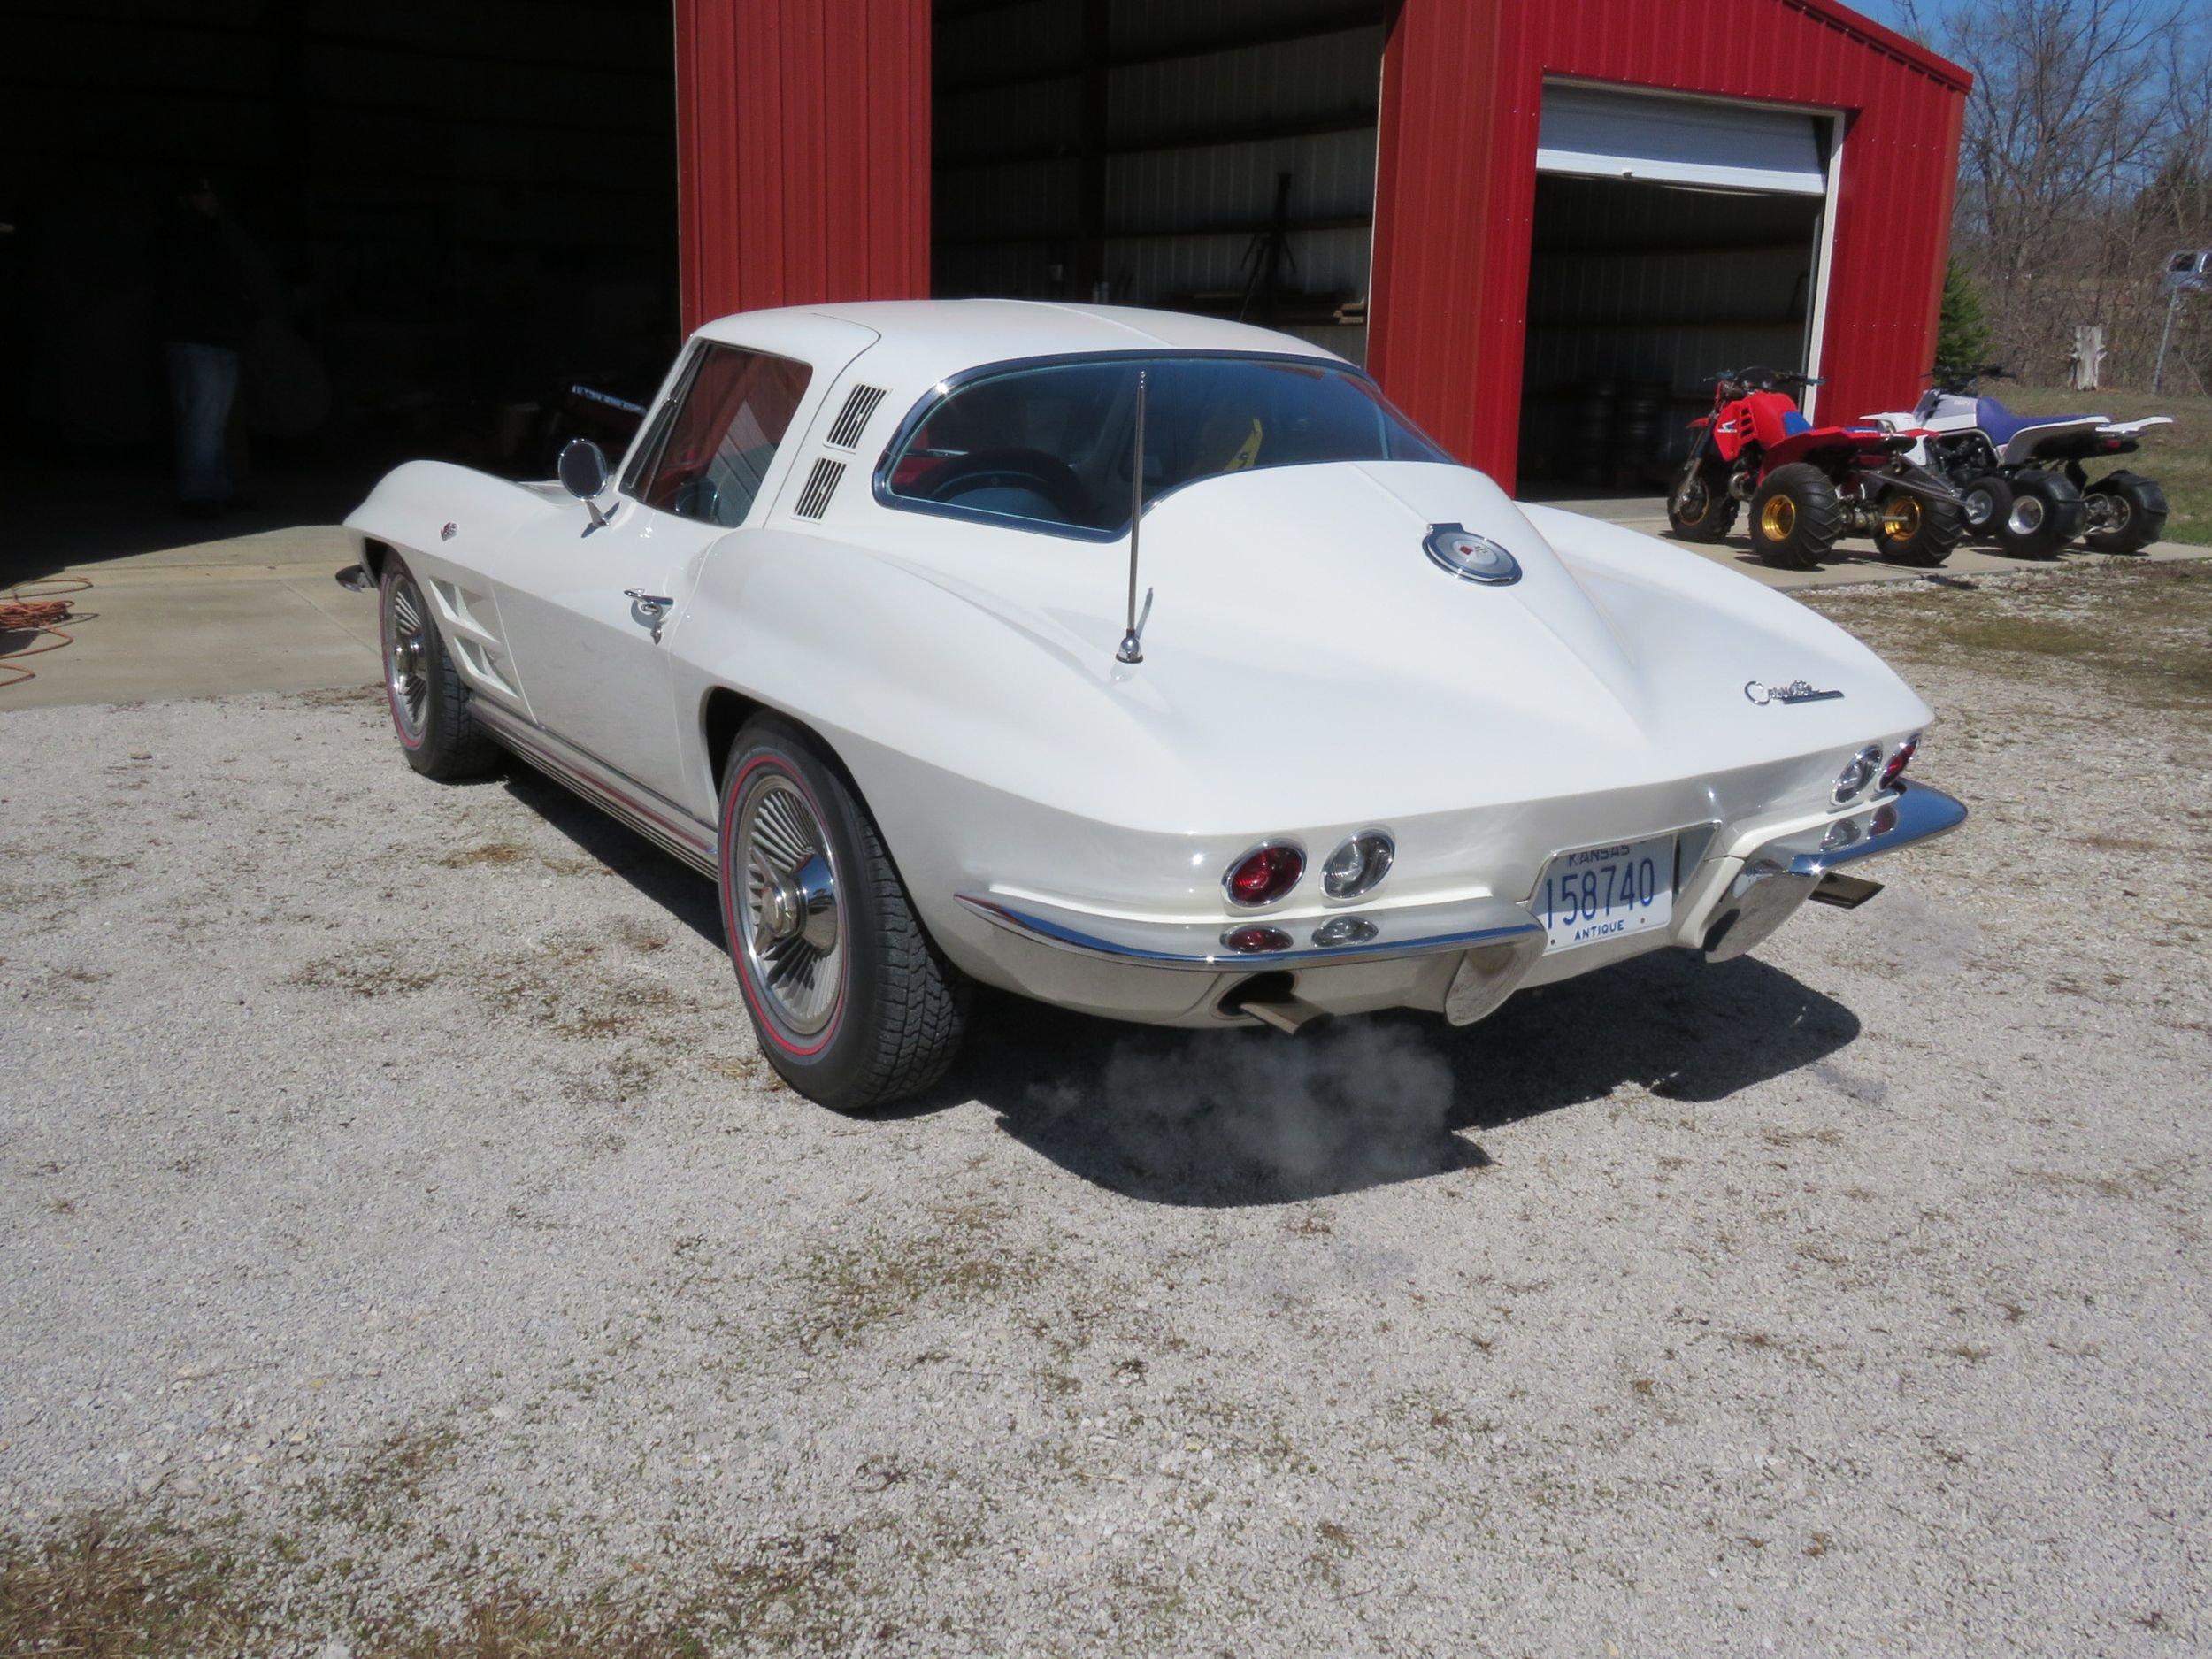 Beautiful 1964 Chevrolet Corvette Sting Ray Coupe